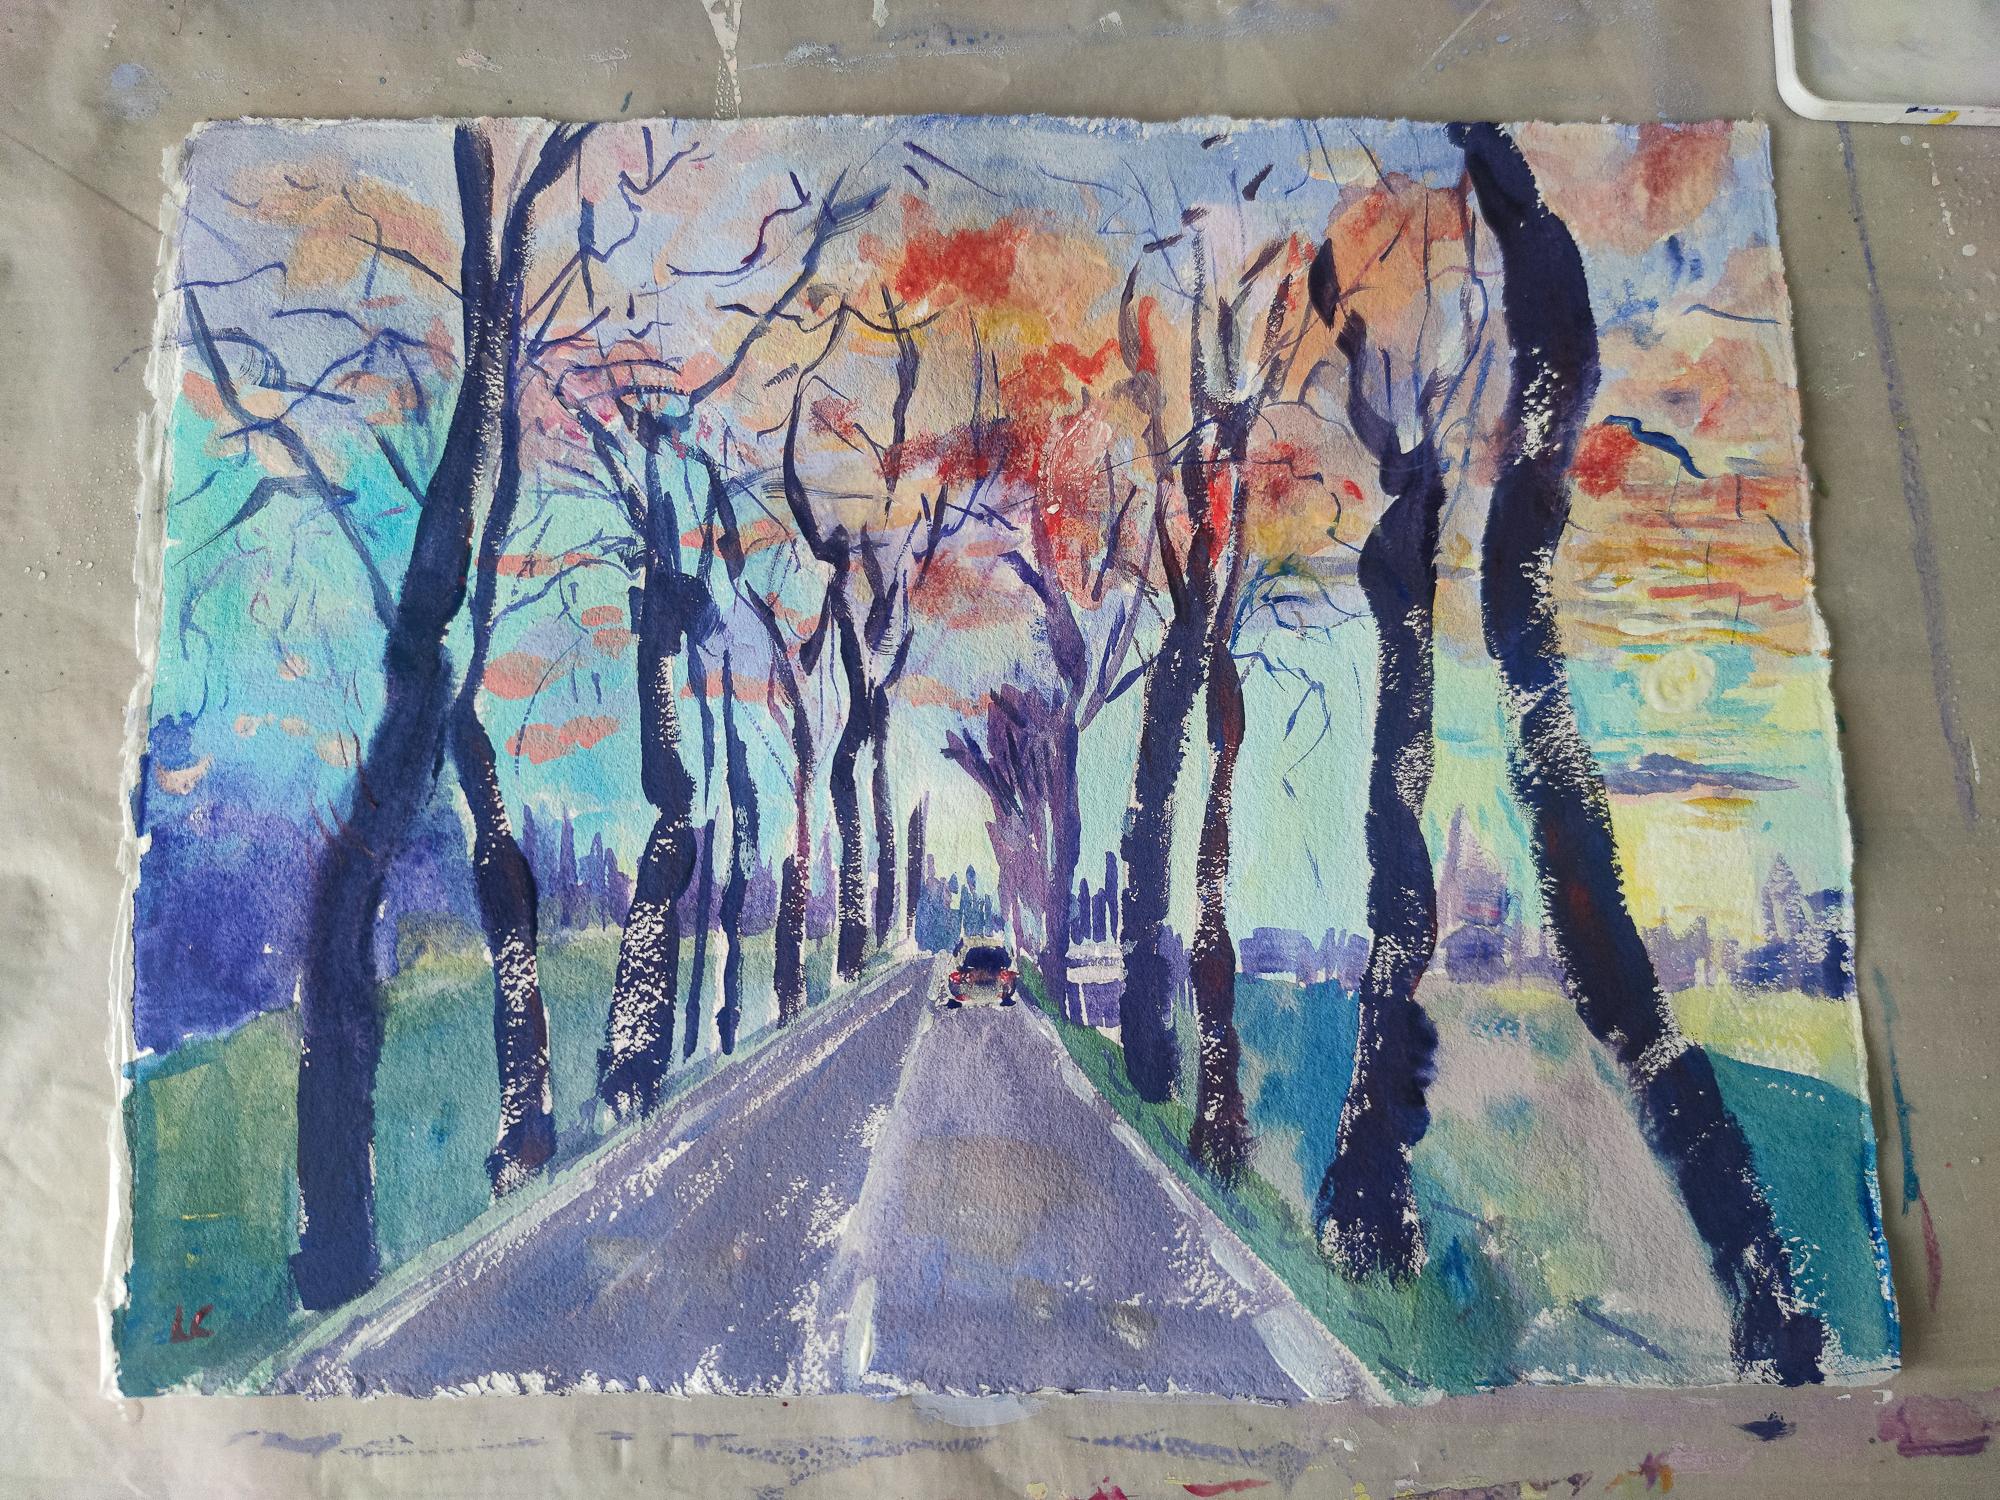 GLOWING SKY OVER THE PLANE TREES - Painting by Linda Clerget